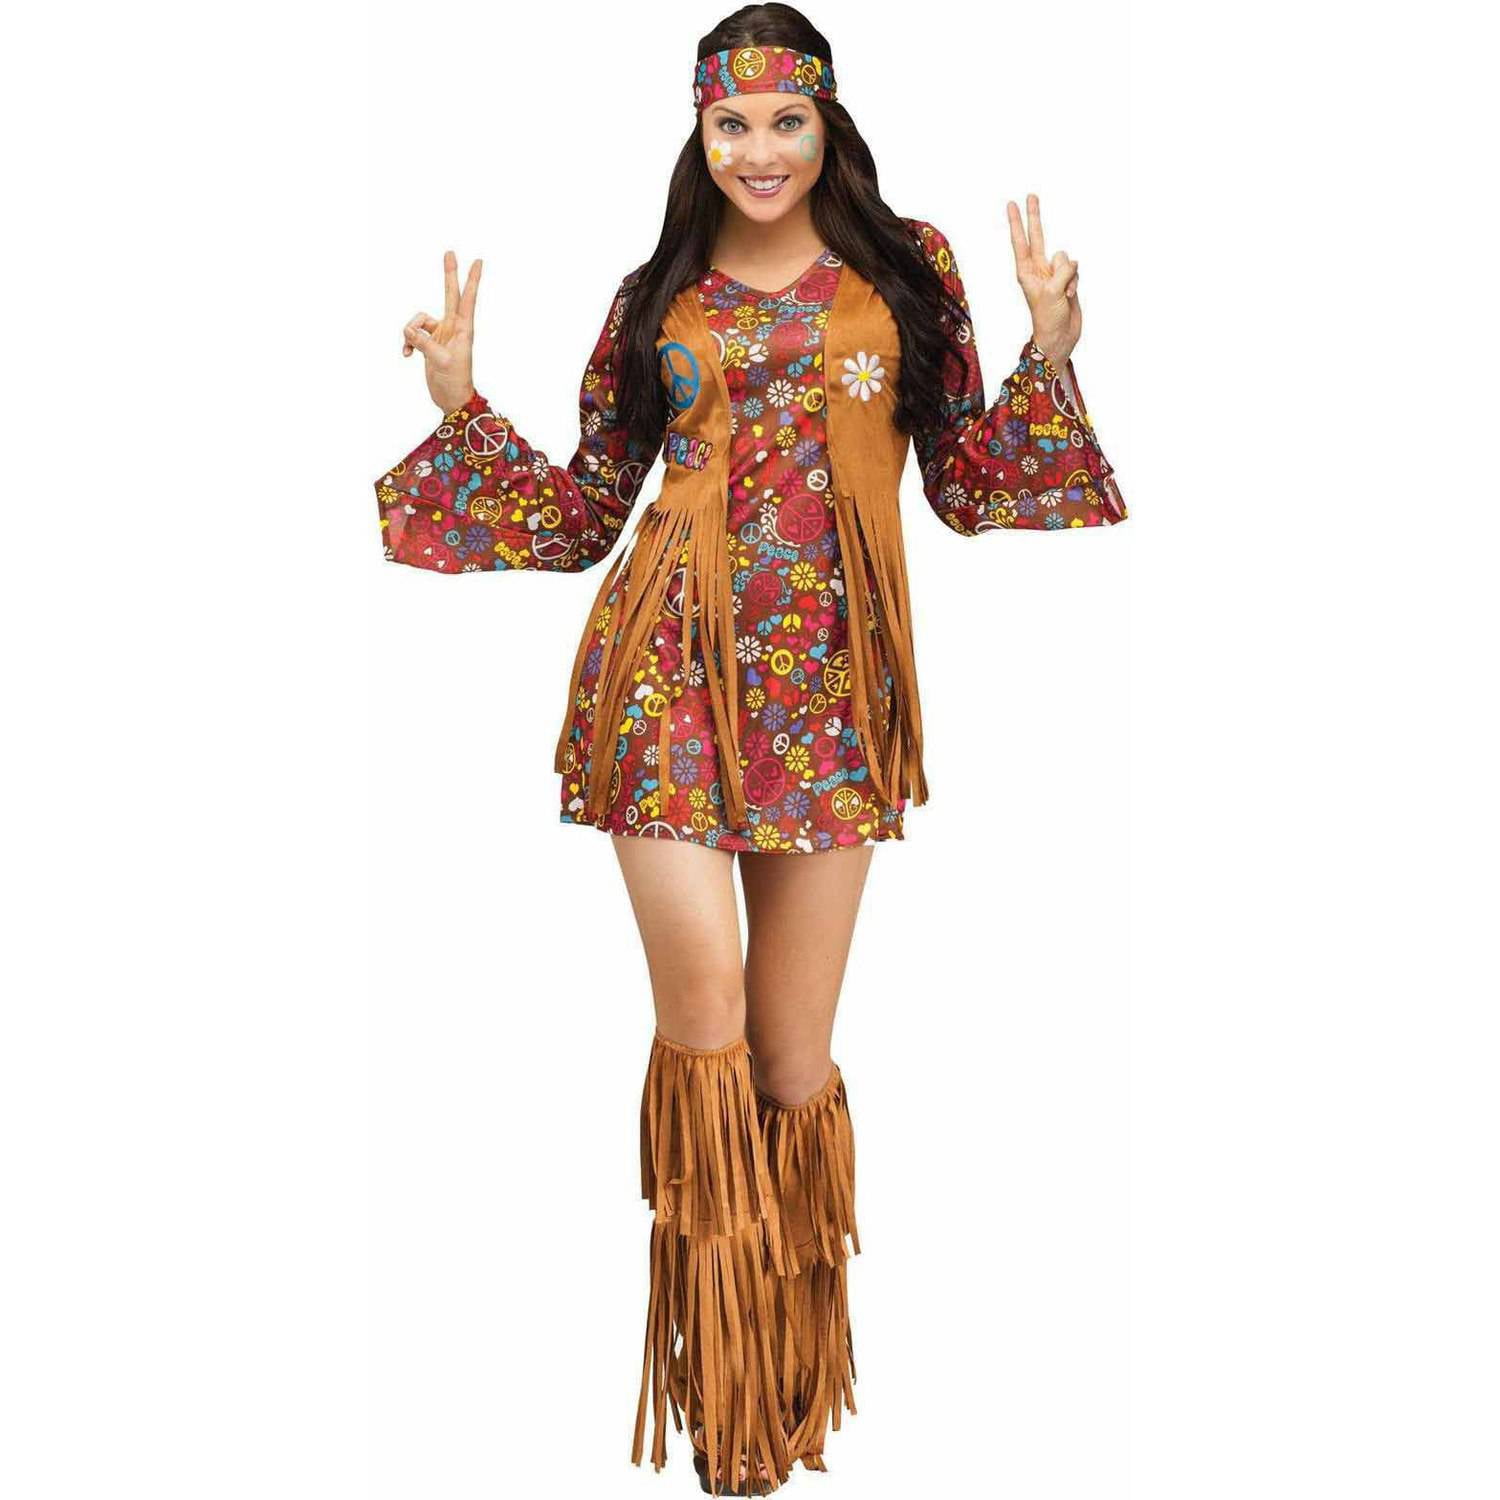 Western Native Indian Wig Adults Fancy Dress Wild West Womens Costume Accessory